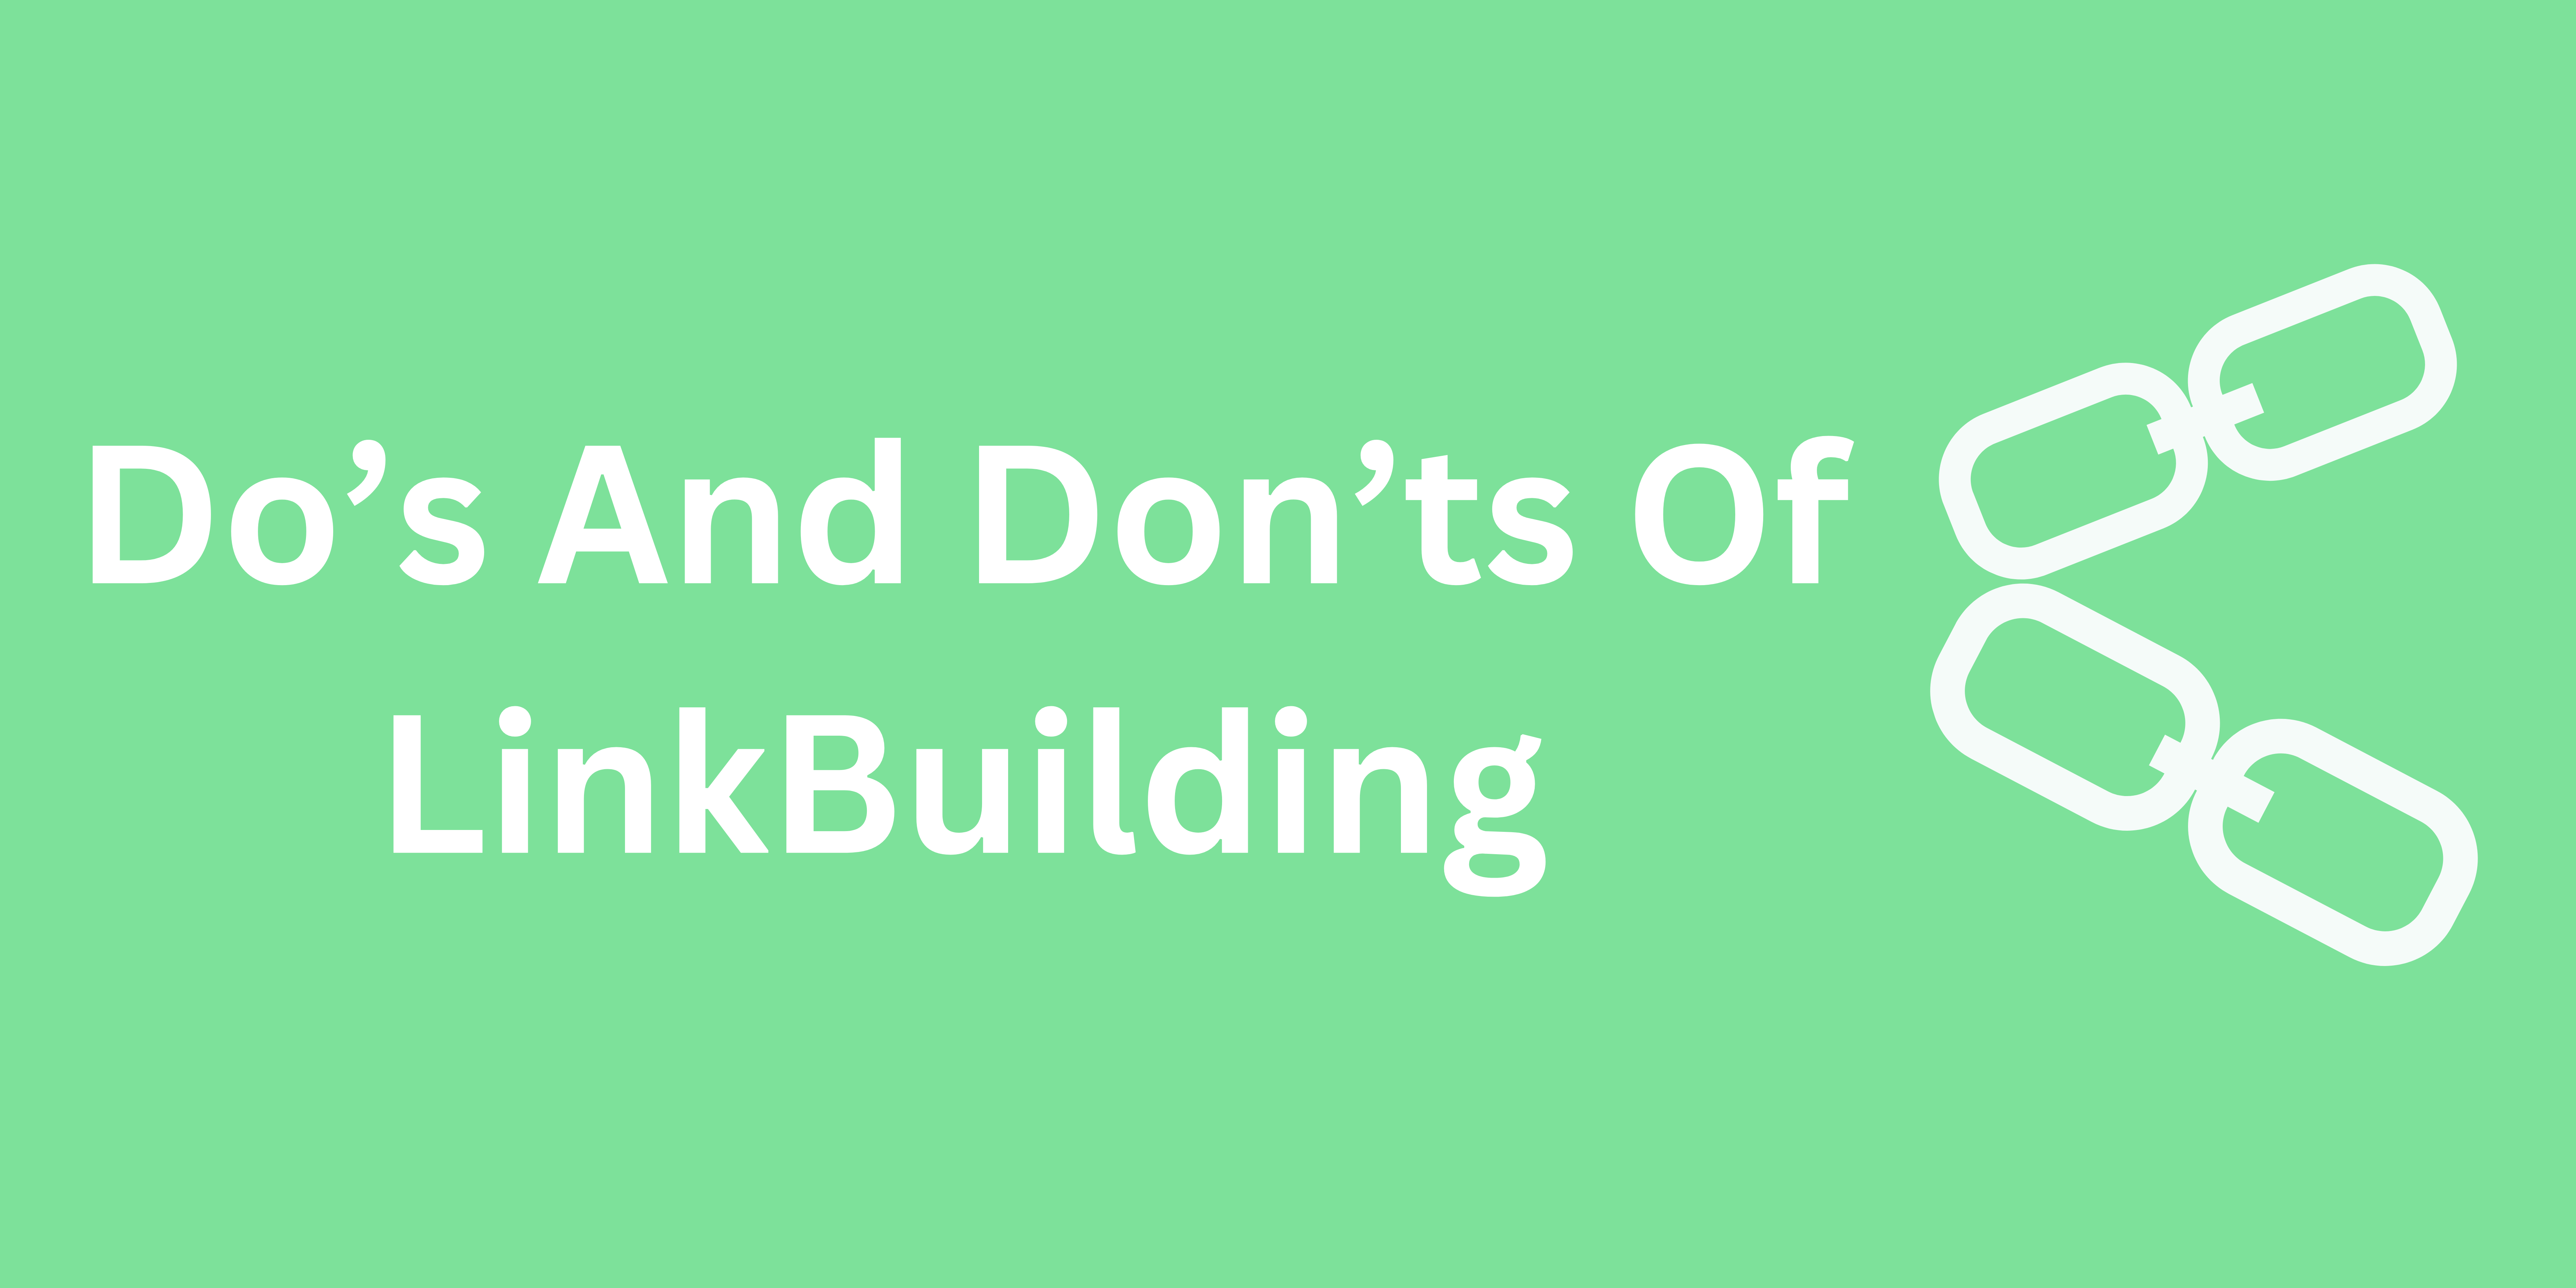 Do’s and Don’ts of Link Building